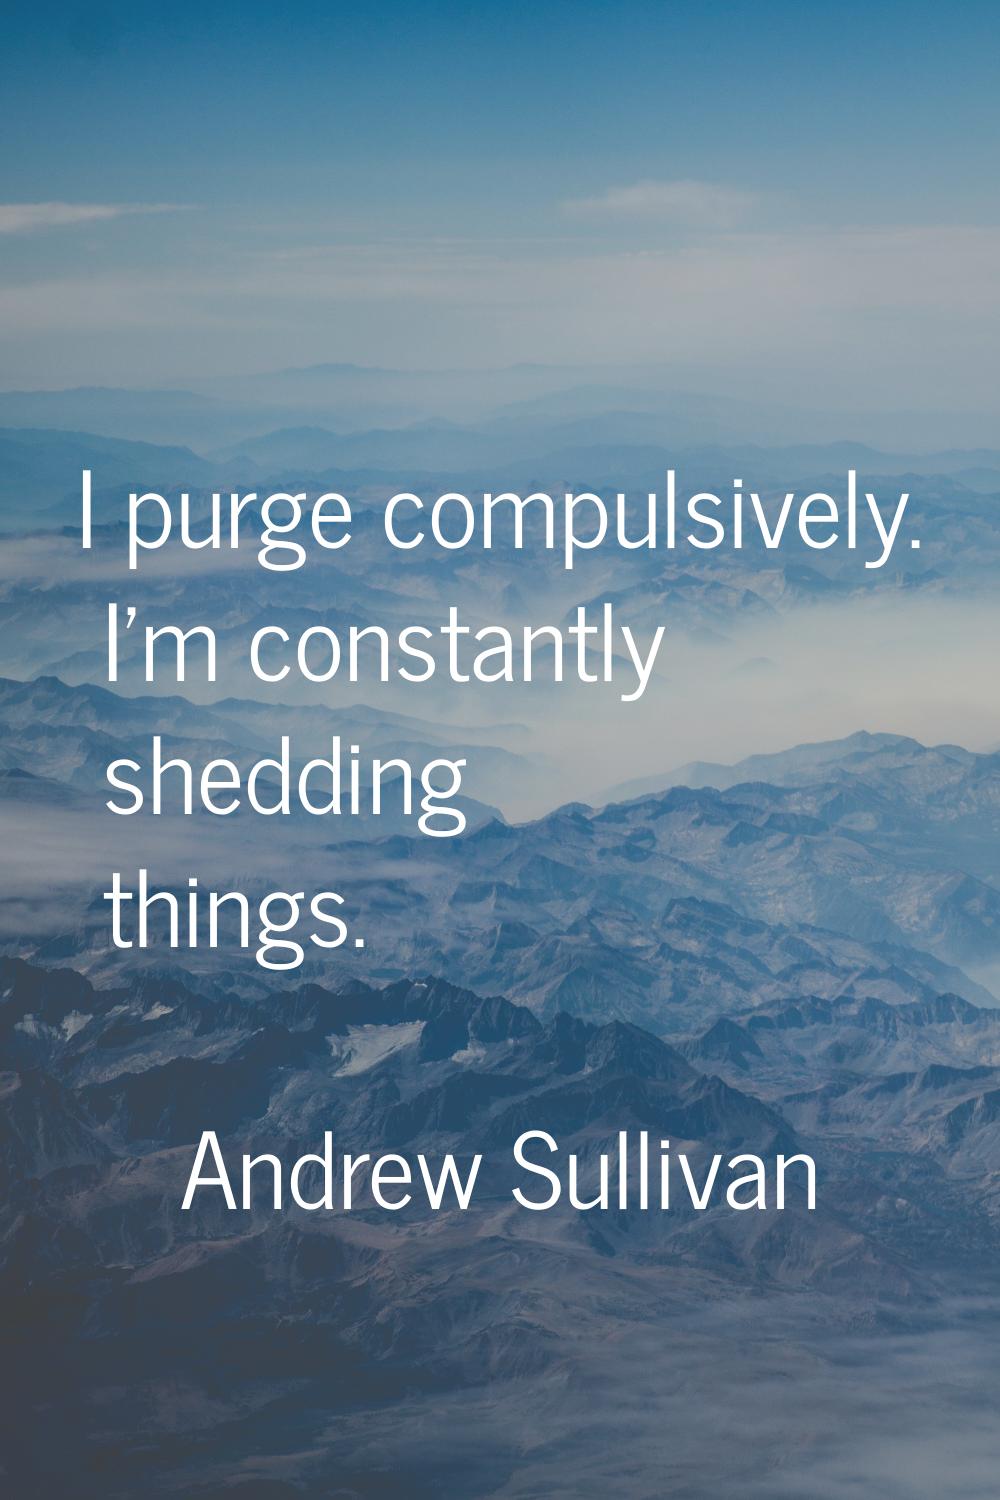 I purge compulsively. I'm constantly shedding things.